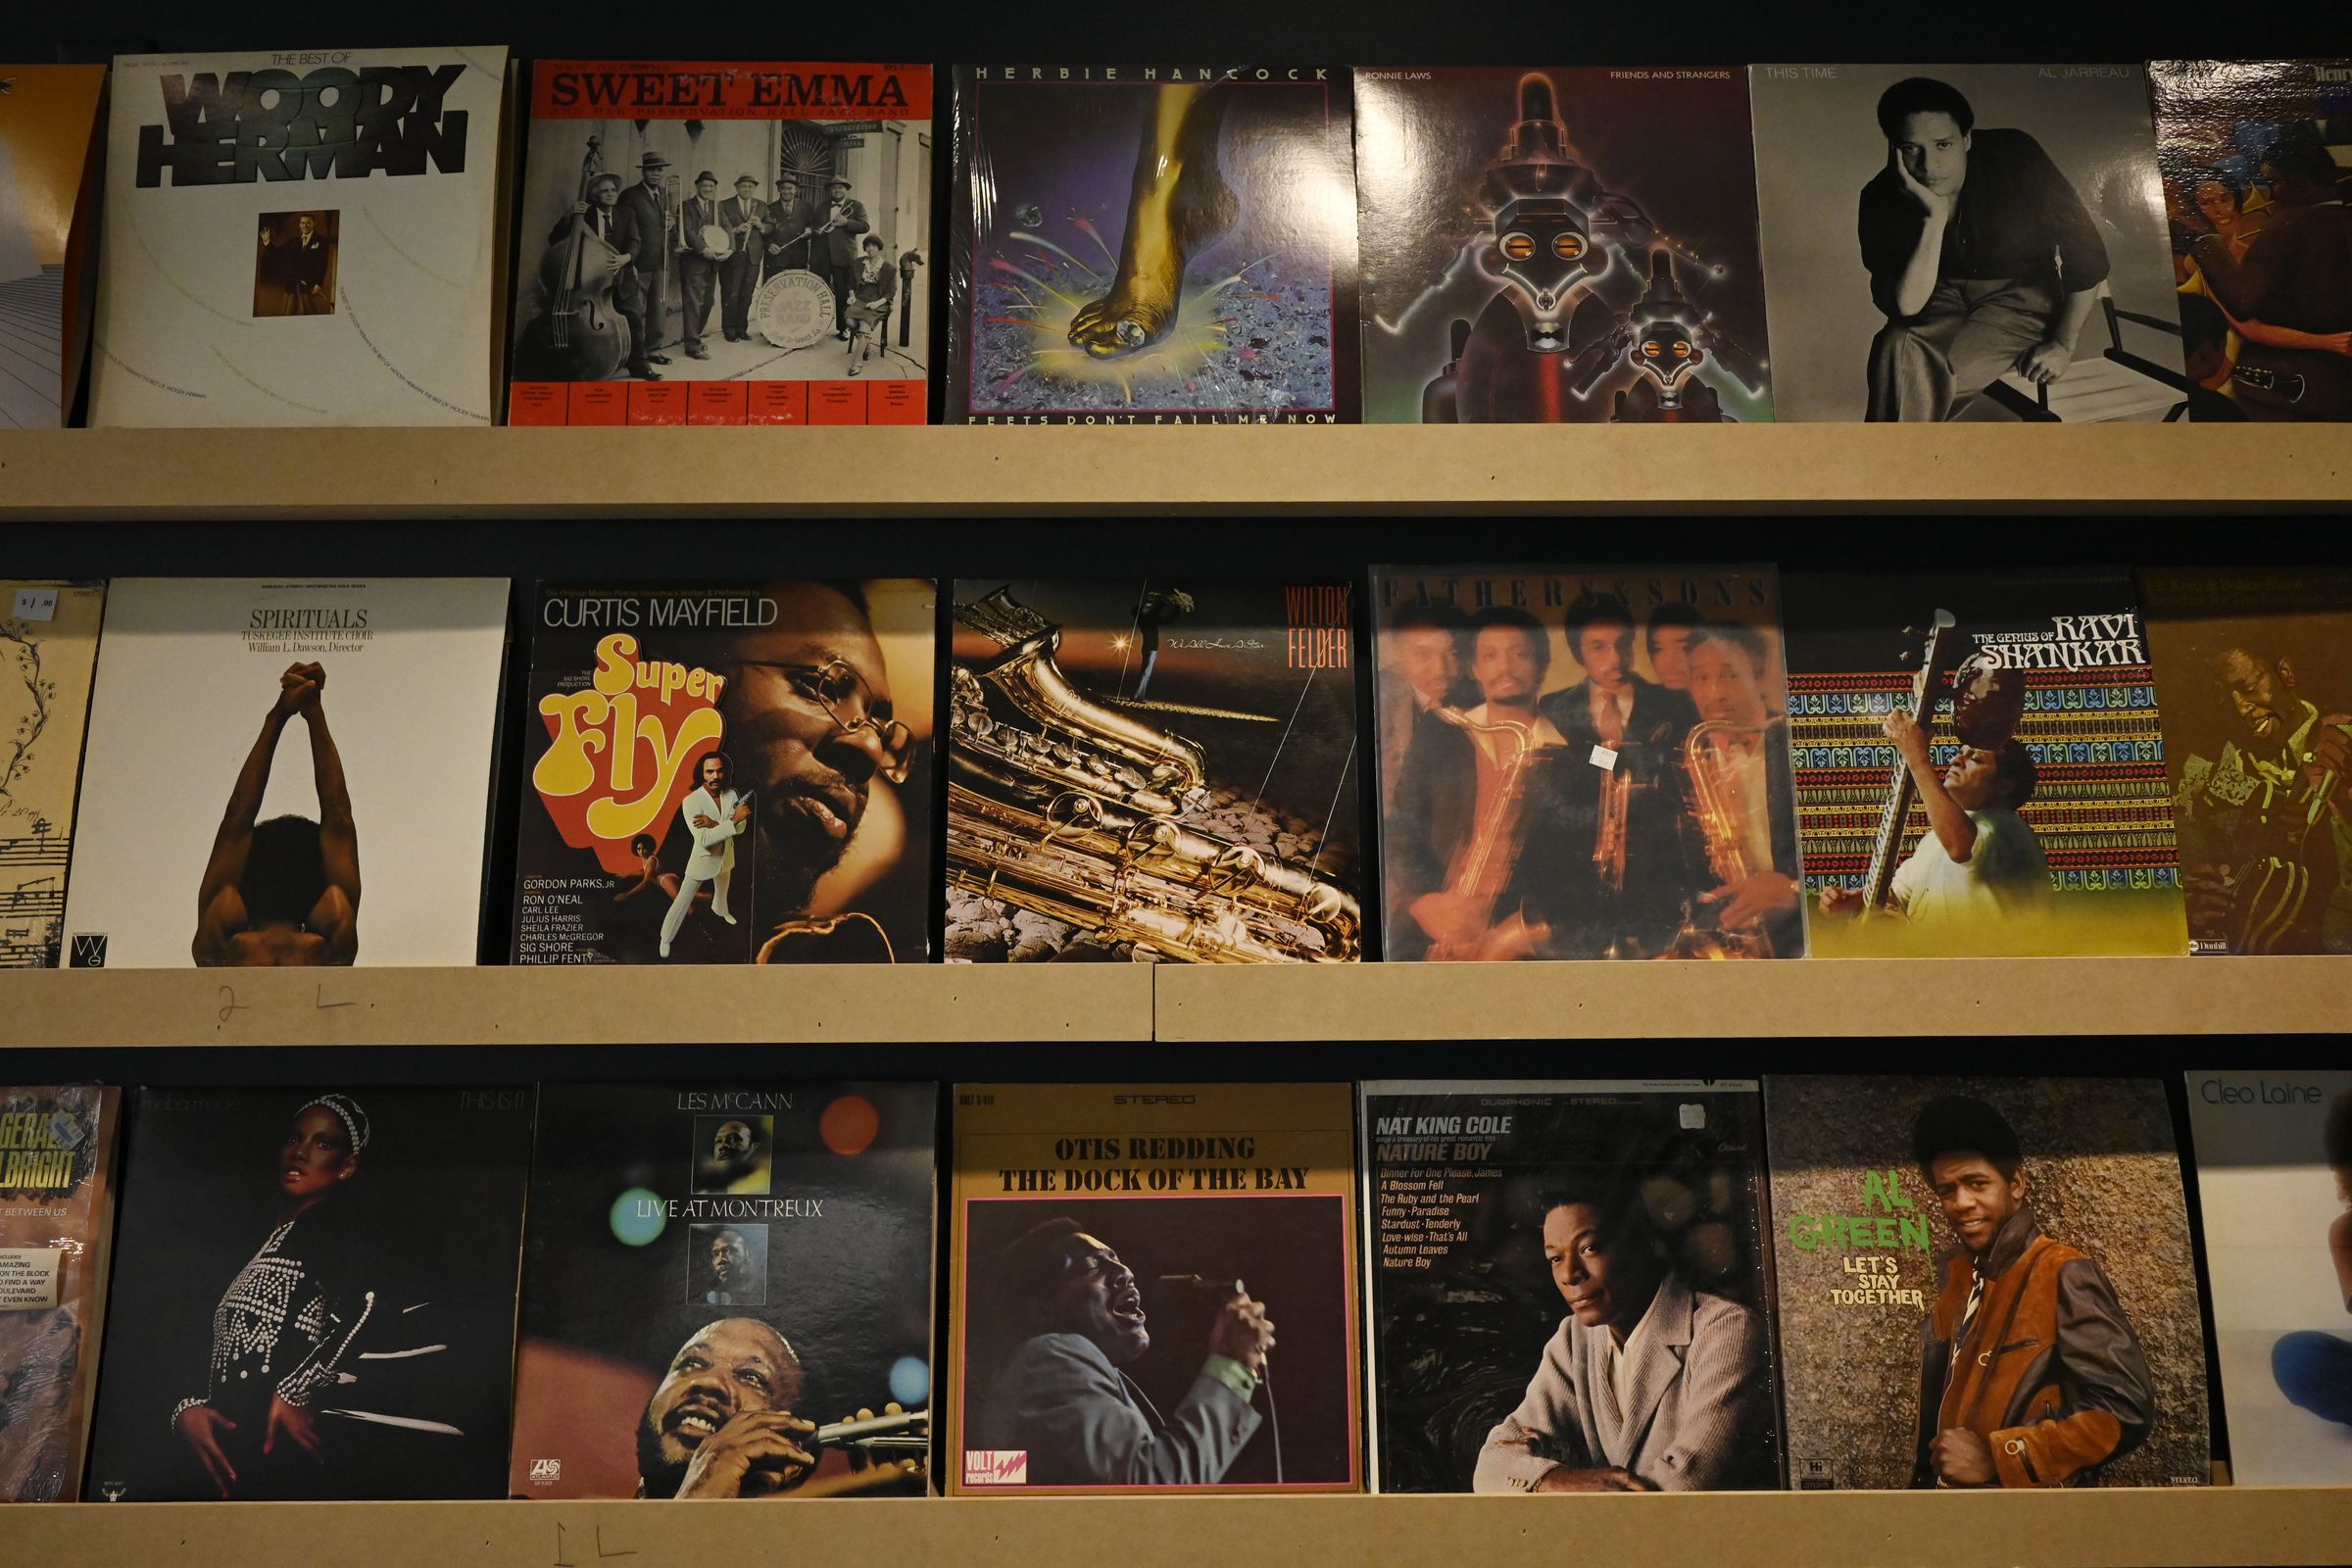 A row of sheleves displaying vinyl record covers.